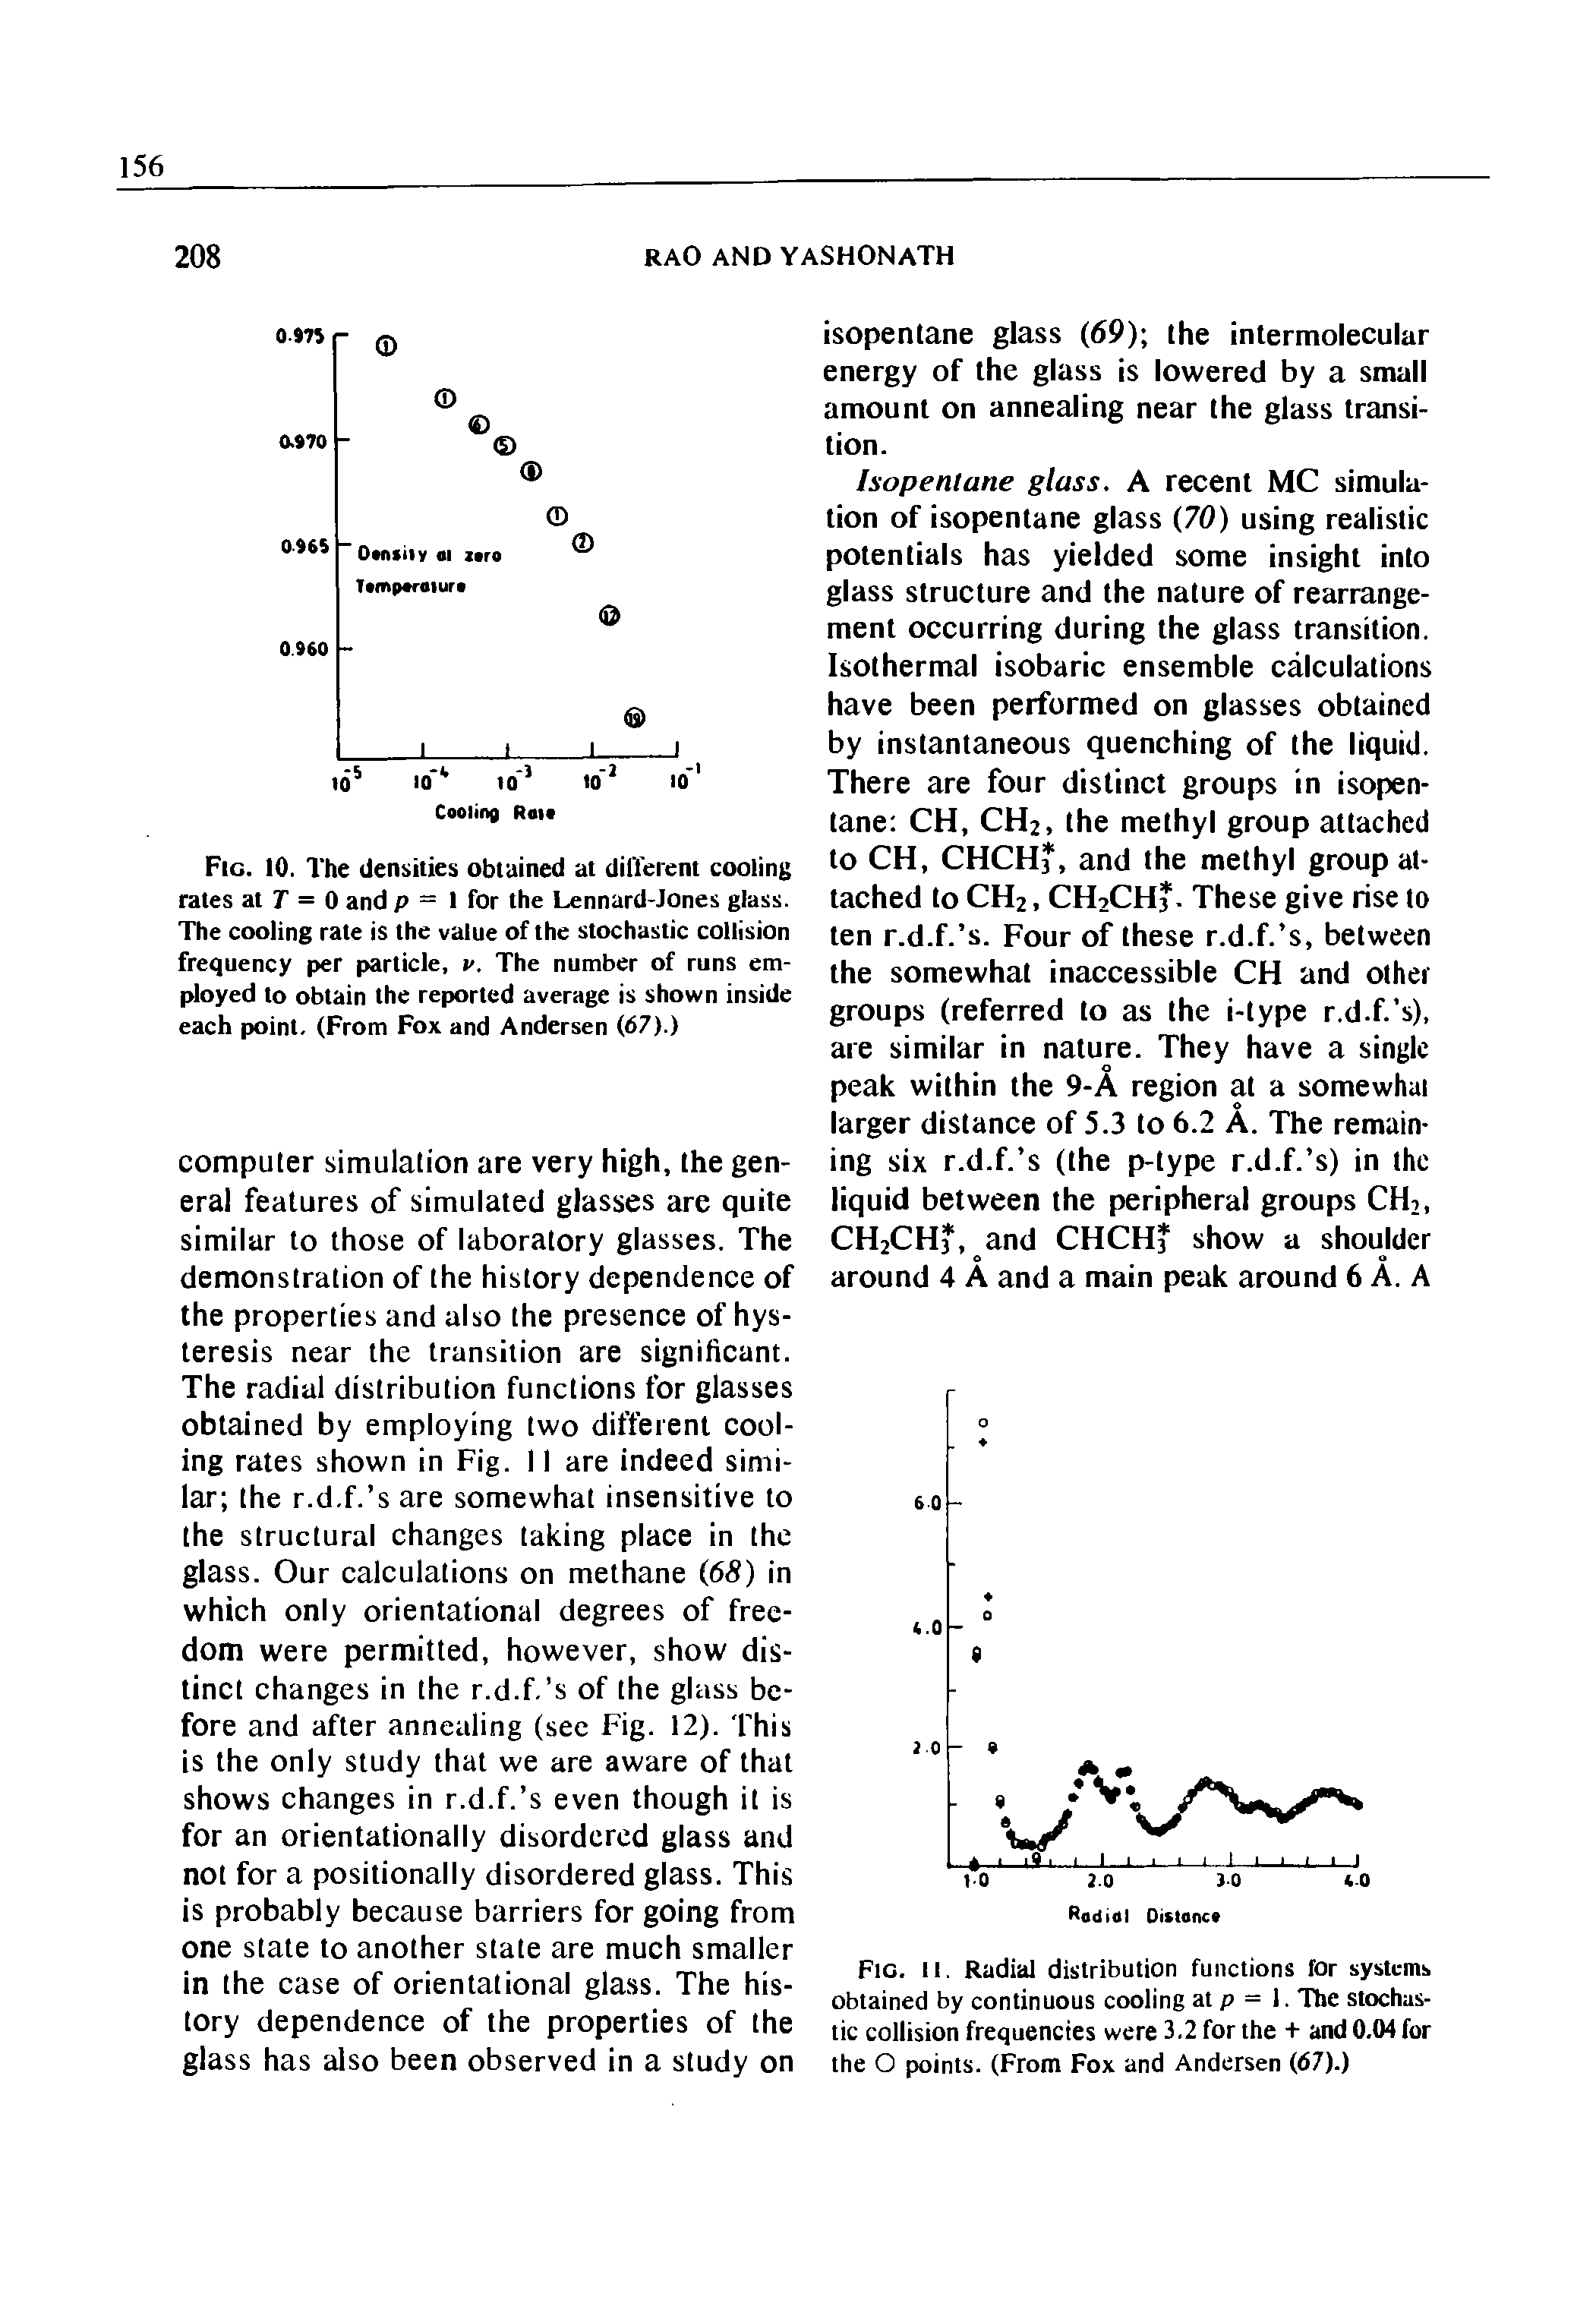 Fig. 10. The densities obtained at different cooling rates at T = 0 and p = 1 for the Lennard-Jones glass. The cooling rate is the value of the stochastic collision frequency per particle, v. The number of runs employed to obtain the reported average is shown inside each point. (From Fox and Andersen (67).)...